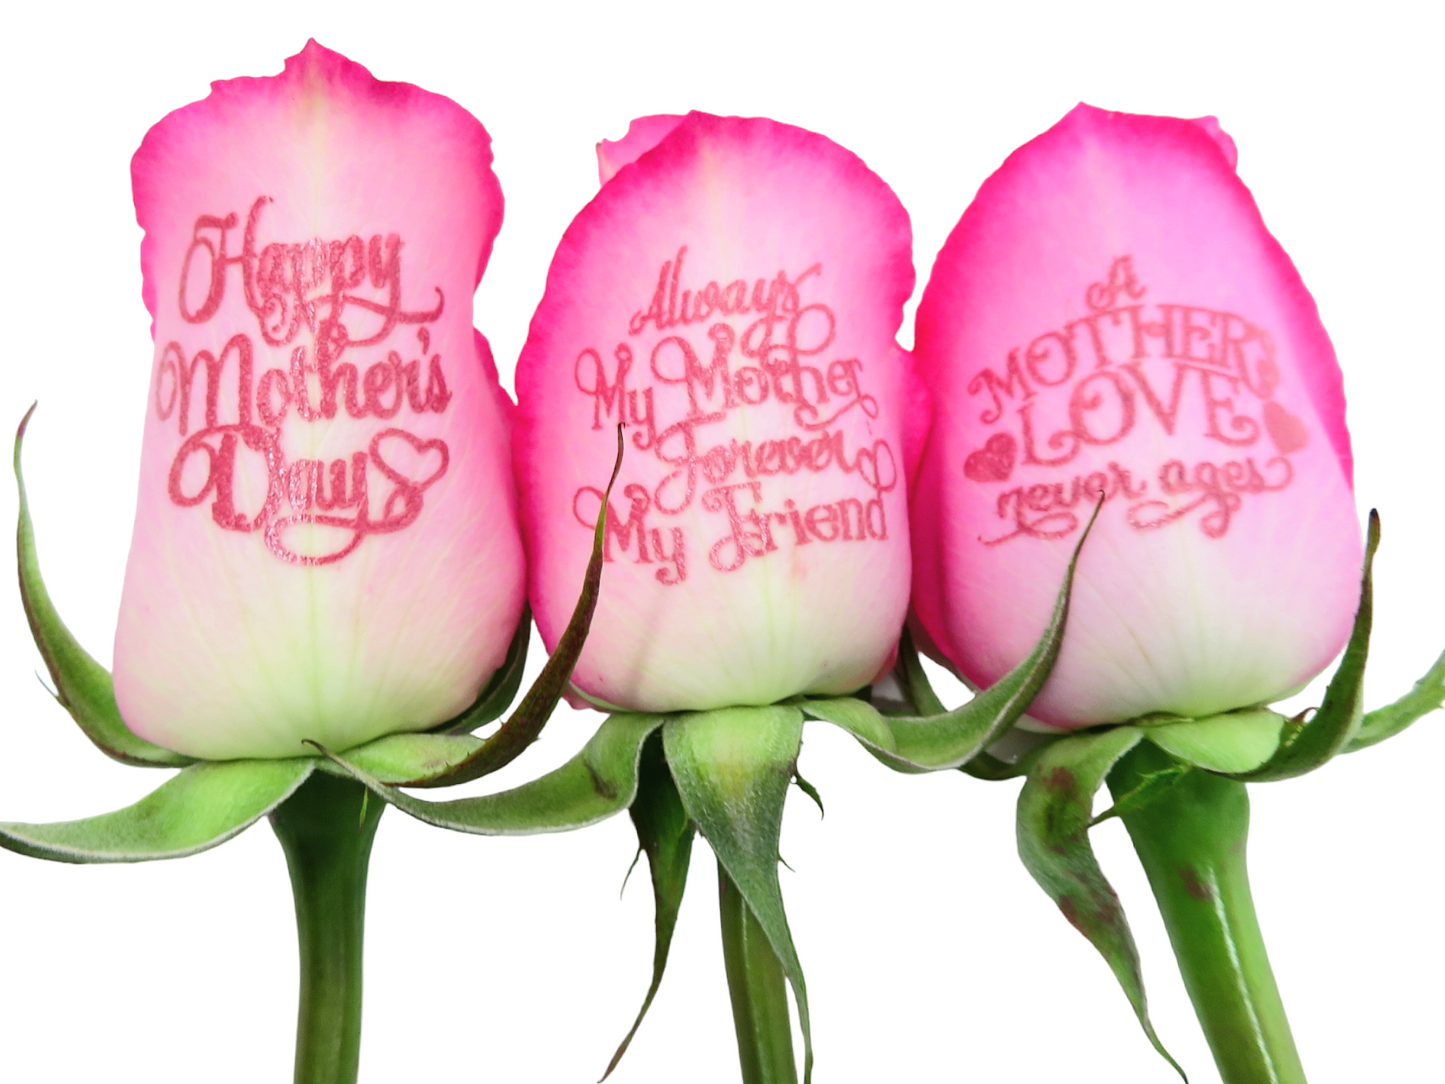 "Happy Mother's Day" 6 Pink Roses with Pink Bow